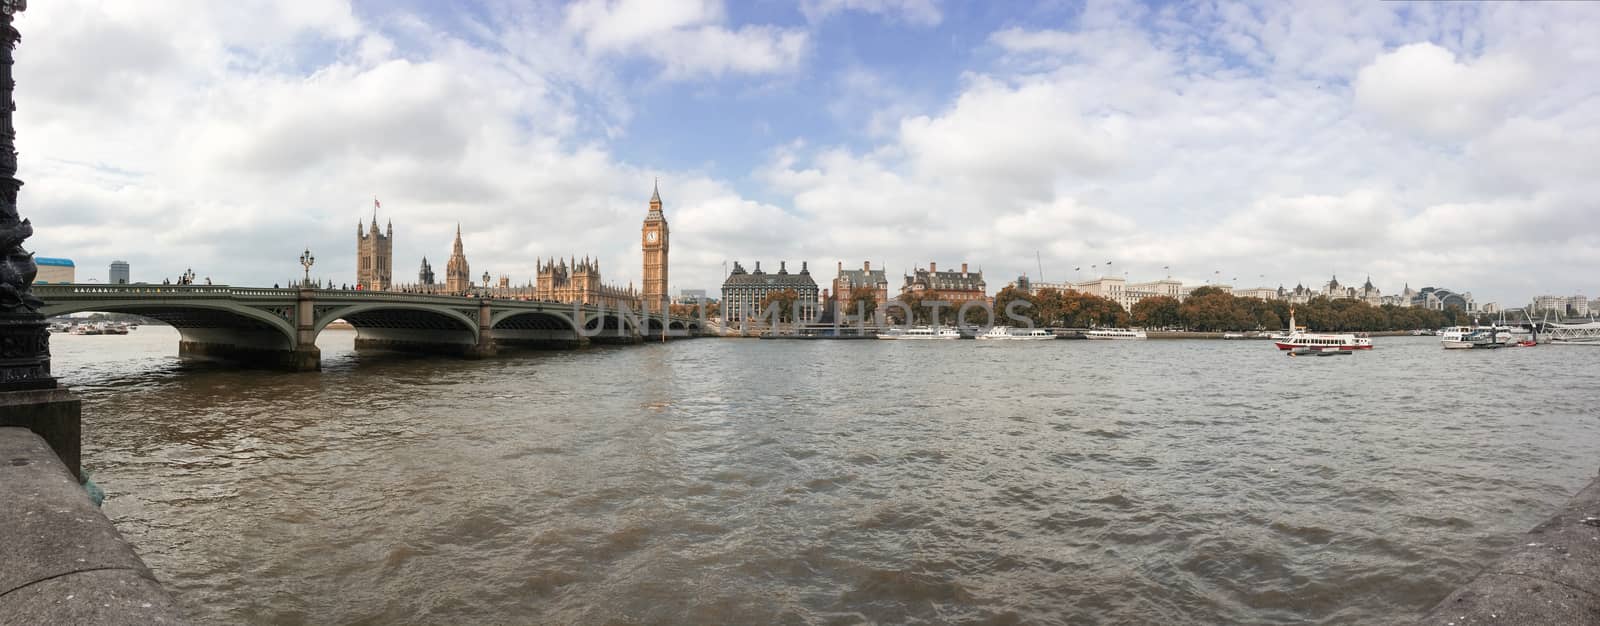 London. Westminster area panoramic view by jovannig